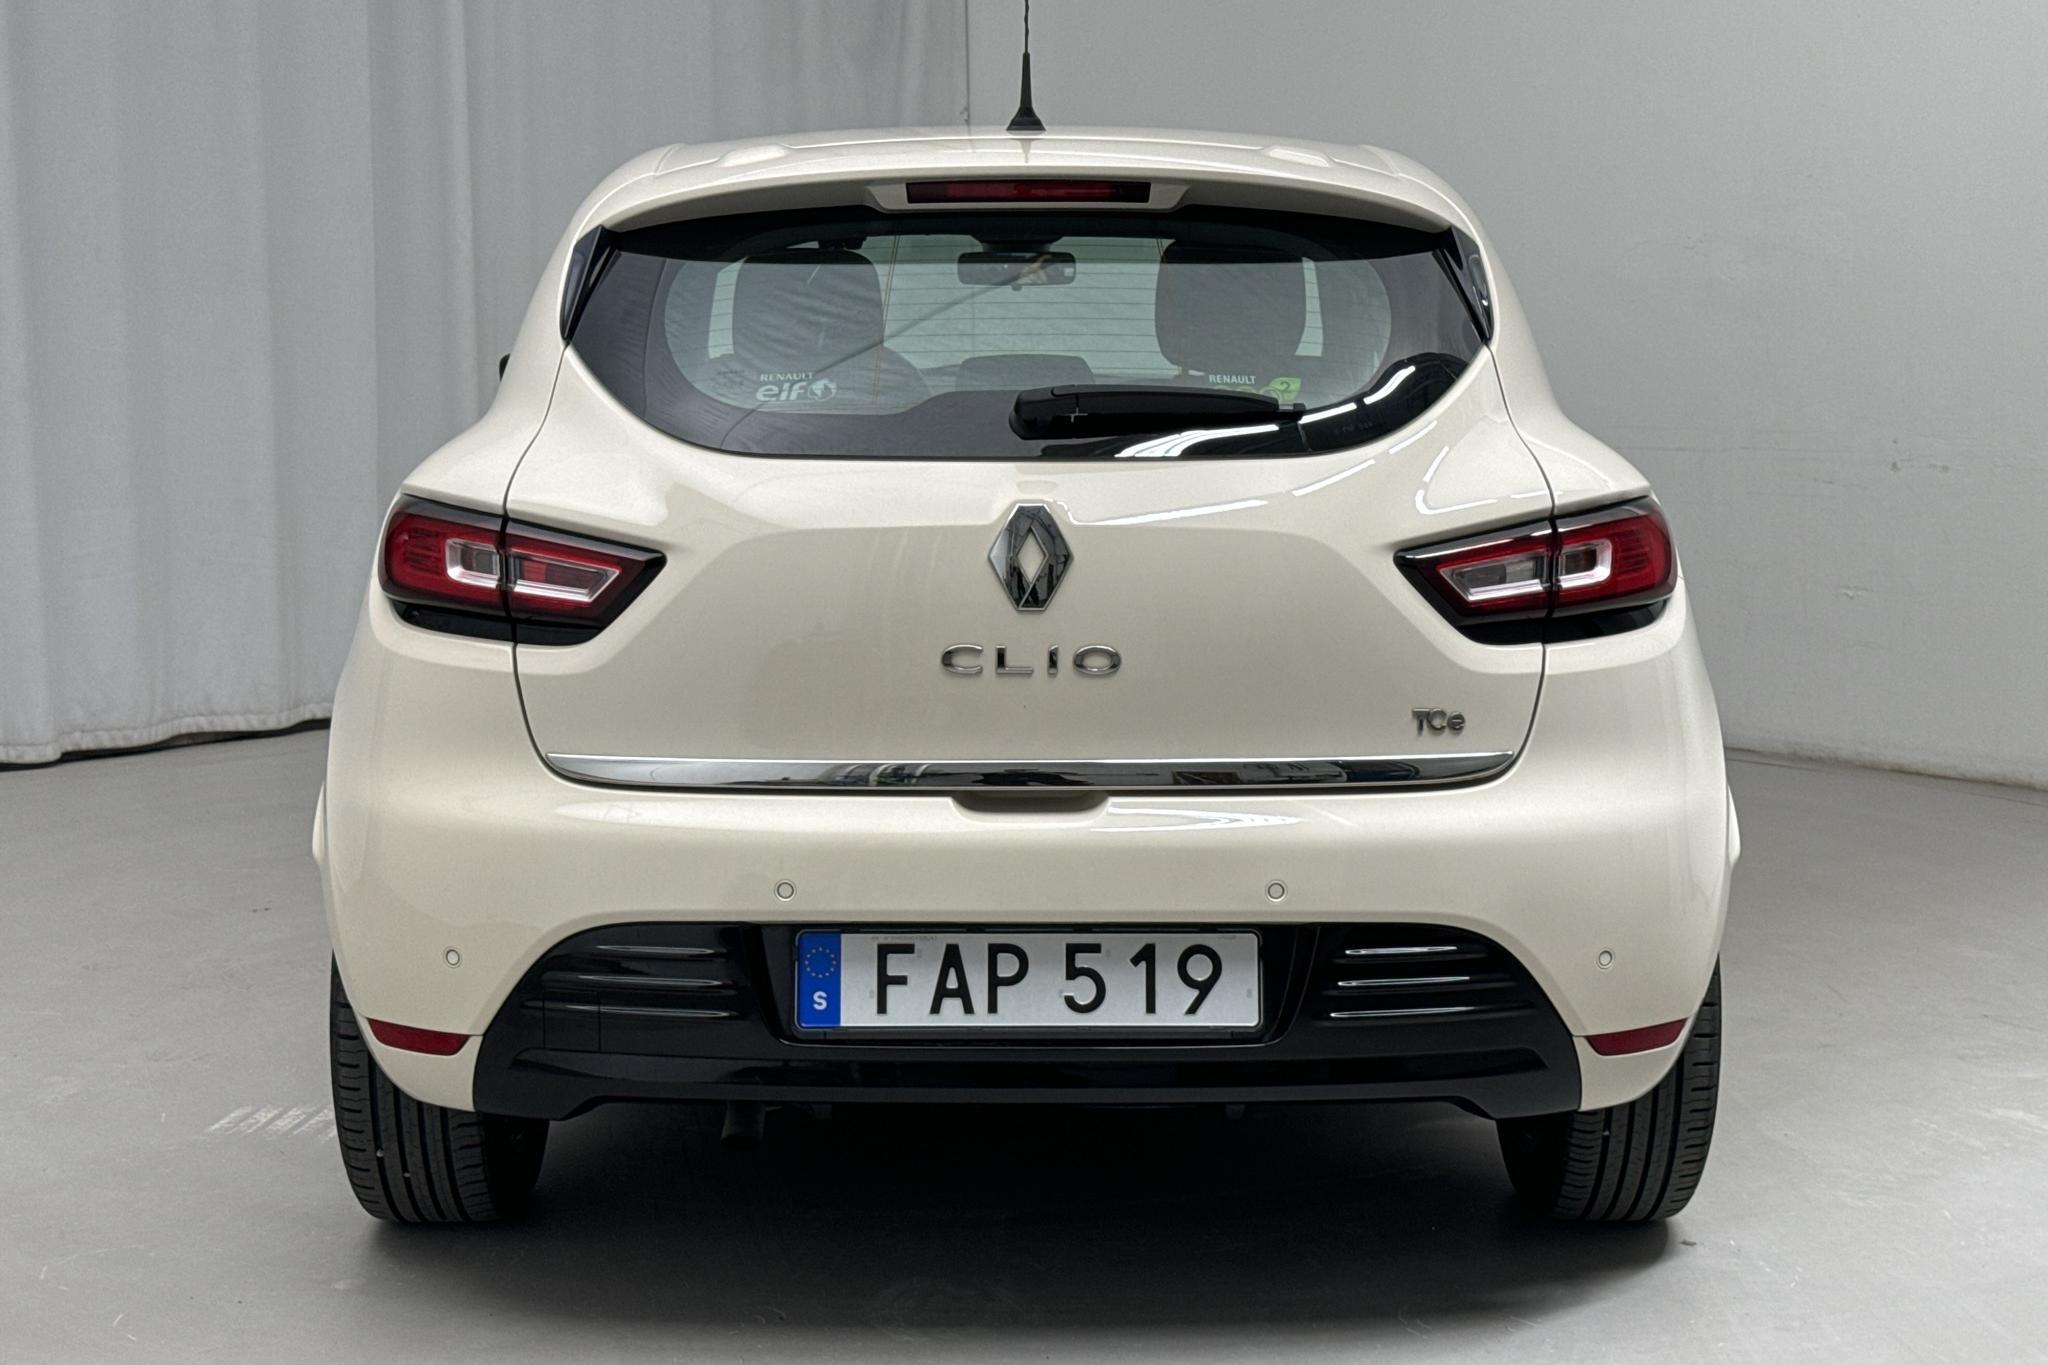 Renault Clio IV 0.9 TCe 90 5dr (90hk) - 38 770 km - Manual - white - 2017